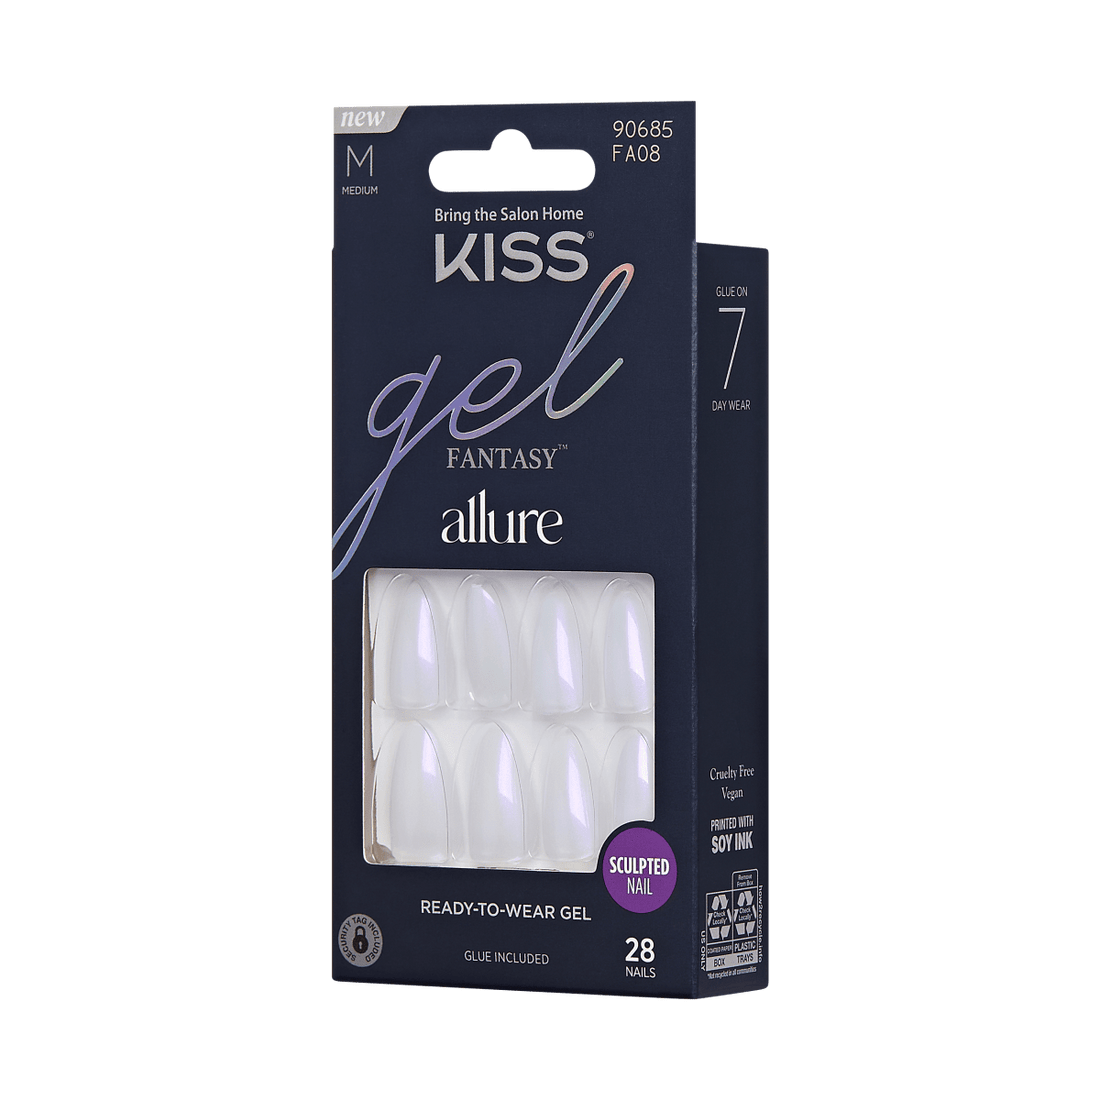 KISS Gel Fantasy, Press-On Nails, Influential, White, Med Almond, 28ct